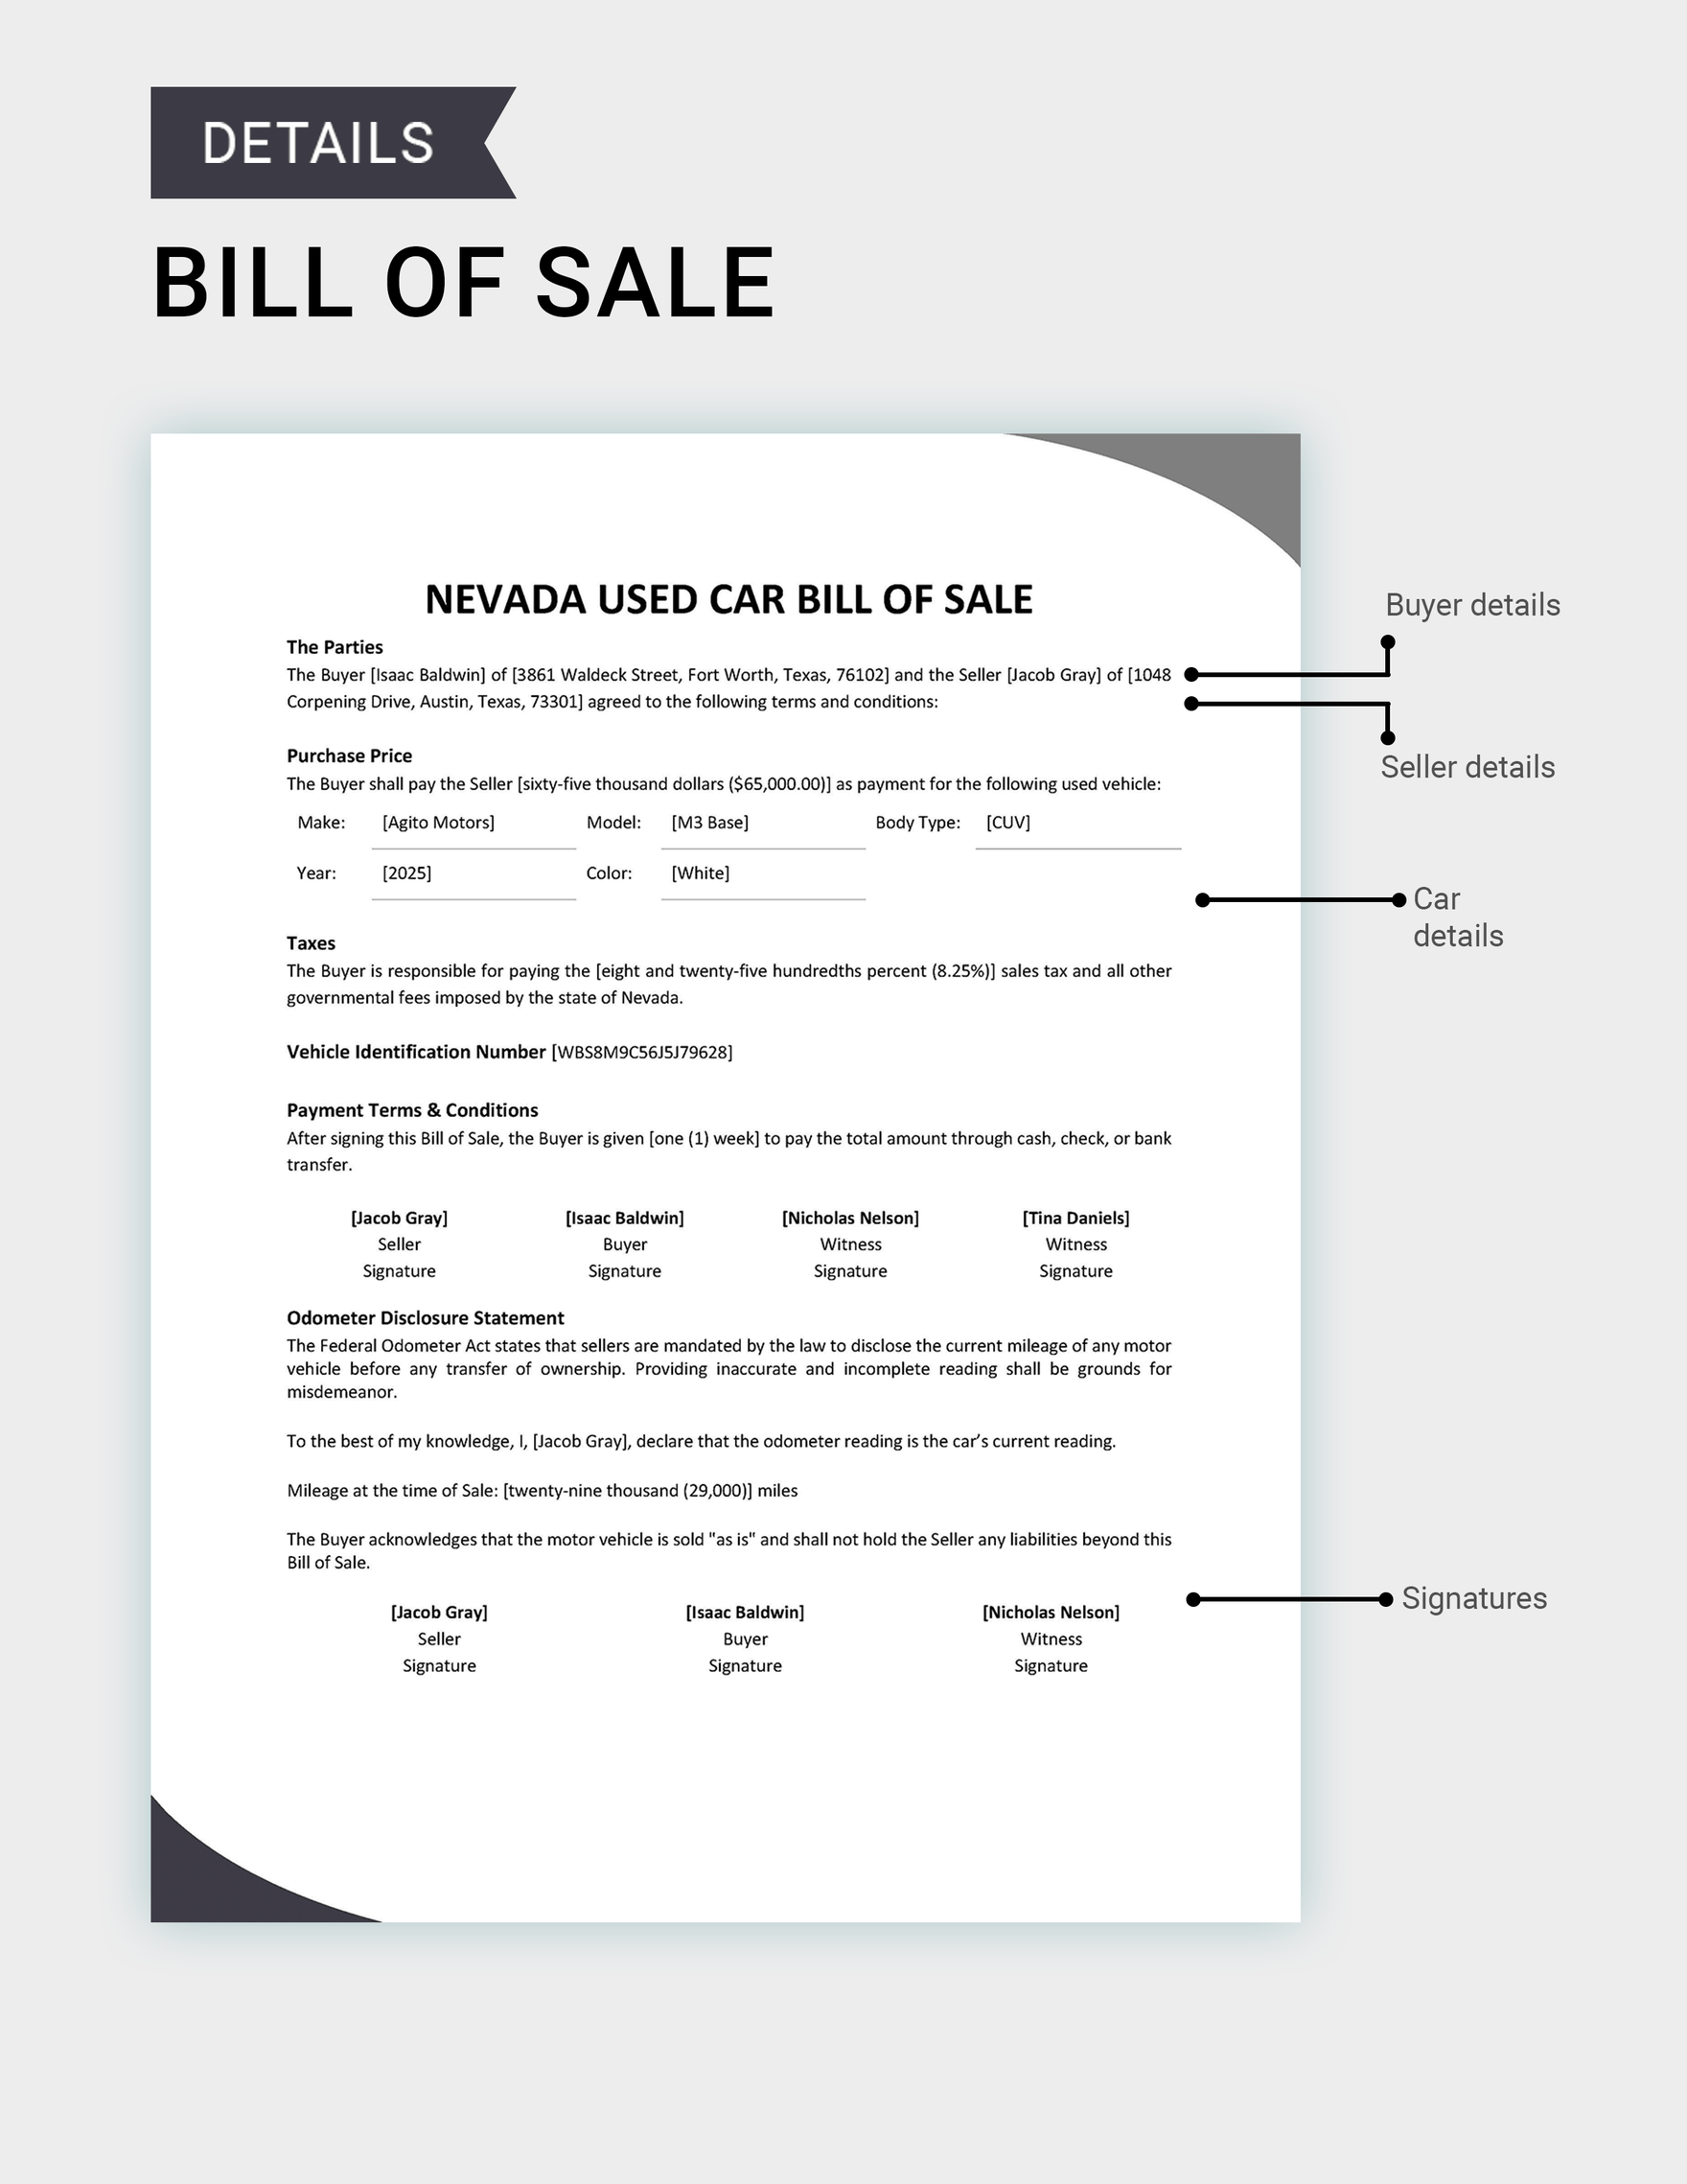 Nevada Used Car Bill of Sale Template